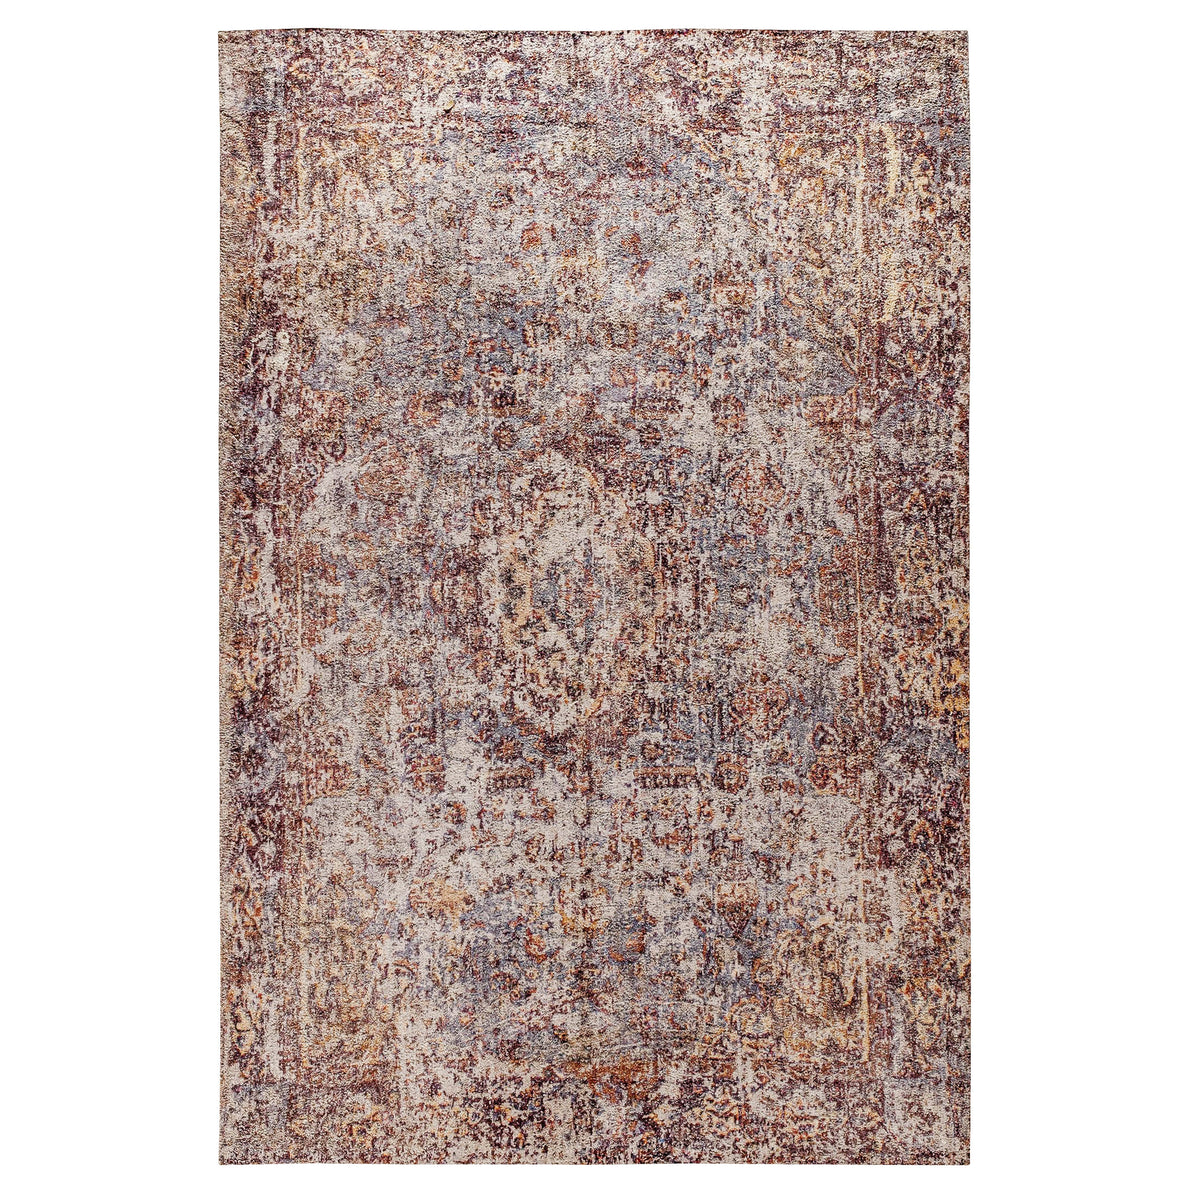 Red,5' x 7' |#| 5' x 7' Multicolor Distressed Artisan Old English Style Traditional Rug